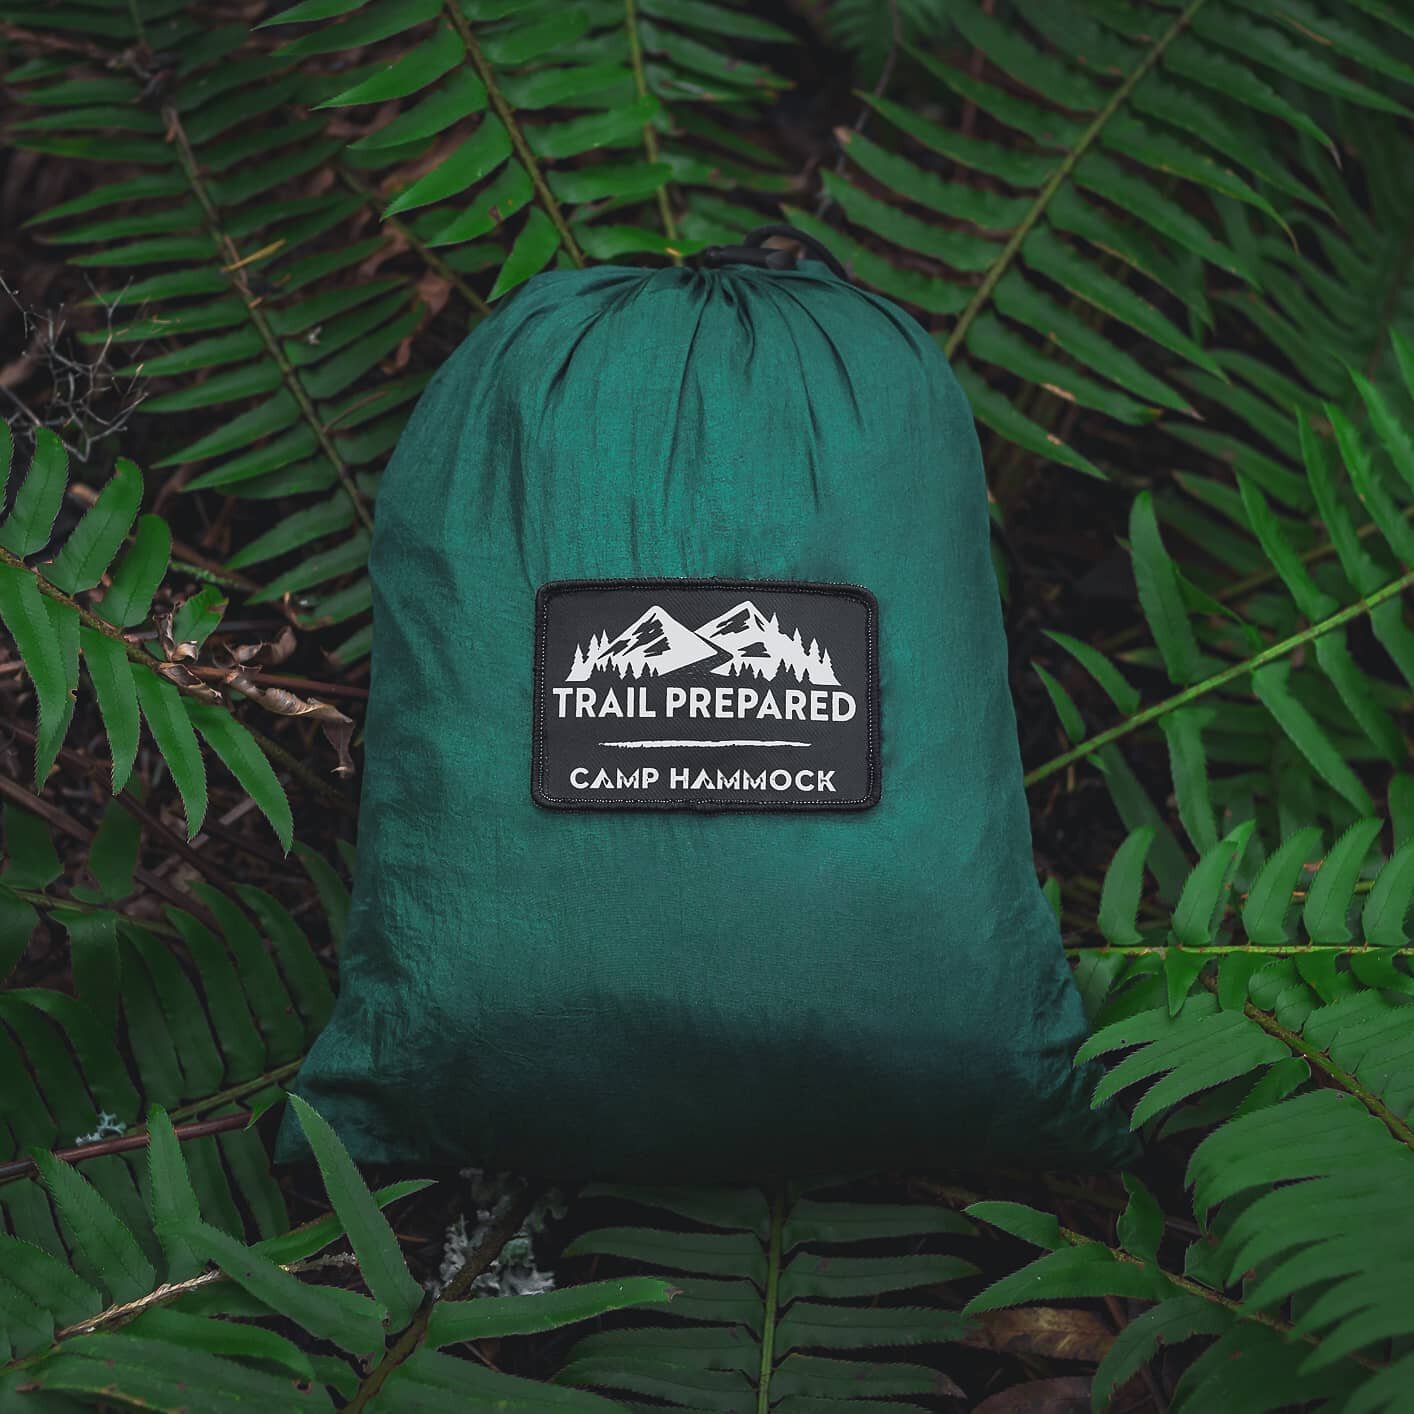 Last day to save 20% with our Black Friday/Cyber Monday sale!! 
Ends tonight at 11:59pm EST.
Use code: BLACKFRIDAY2020
-
-
-
-
-
#TrailPrepared #YouBelongOutdoors #CampHammock #Hammock #ParachuteHammock #Camp #Camping #Hiking #Backpacking #Travel #Tr